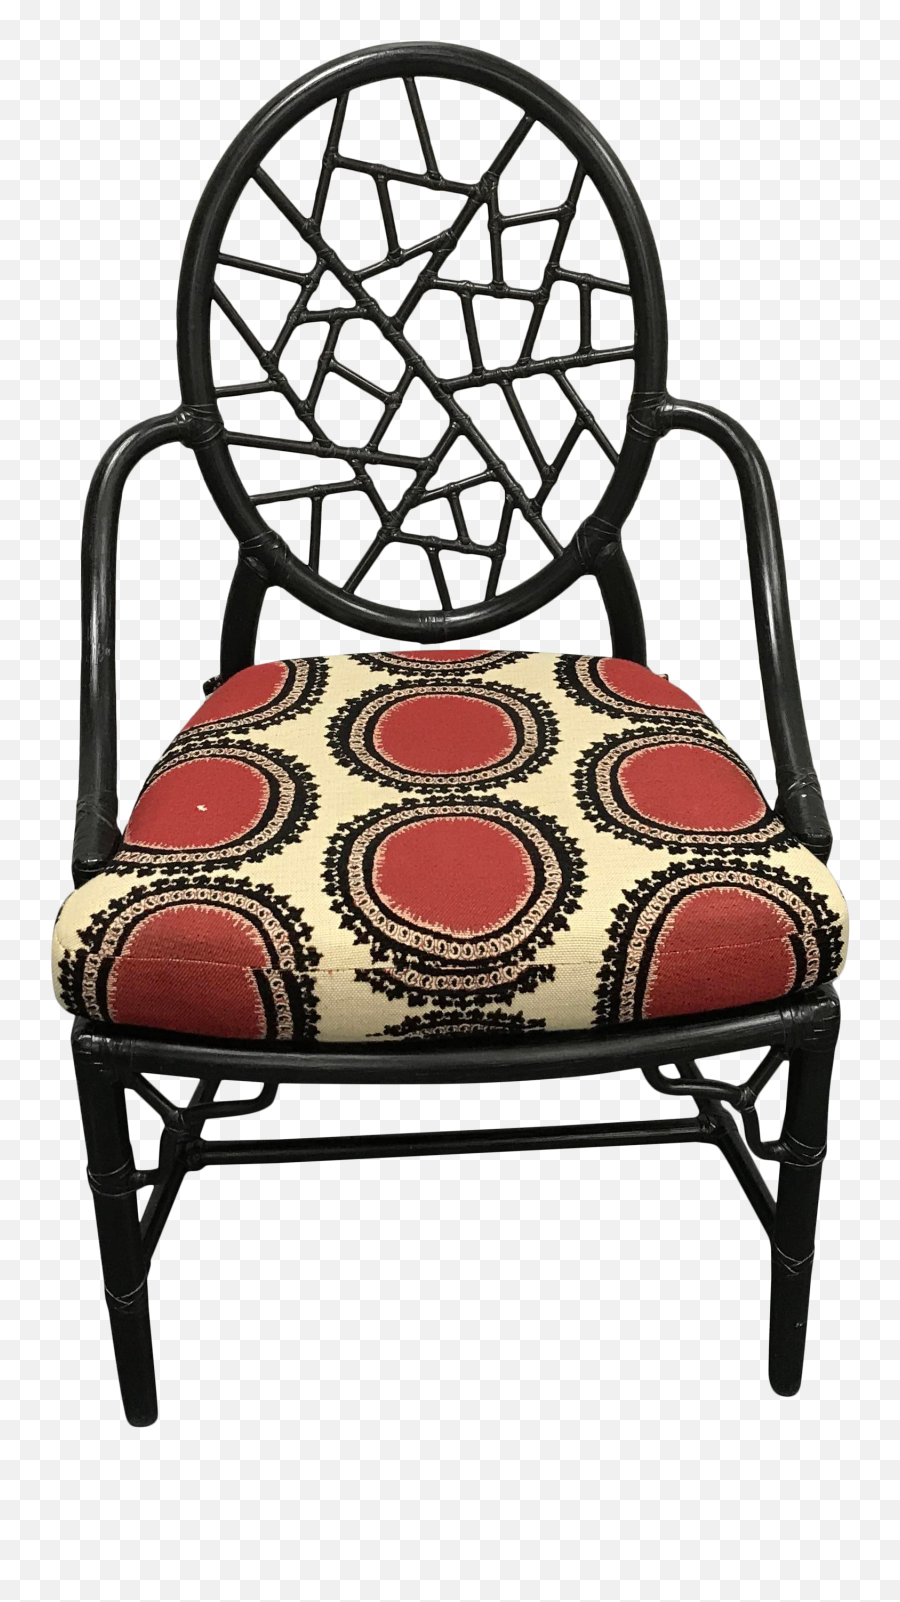 Vintage Black Mcguire Cracked Glass Chair - Chair Png,Cracked Glass Png